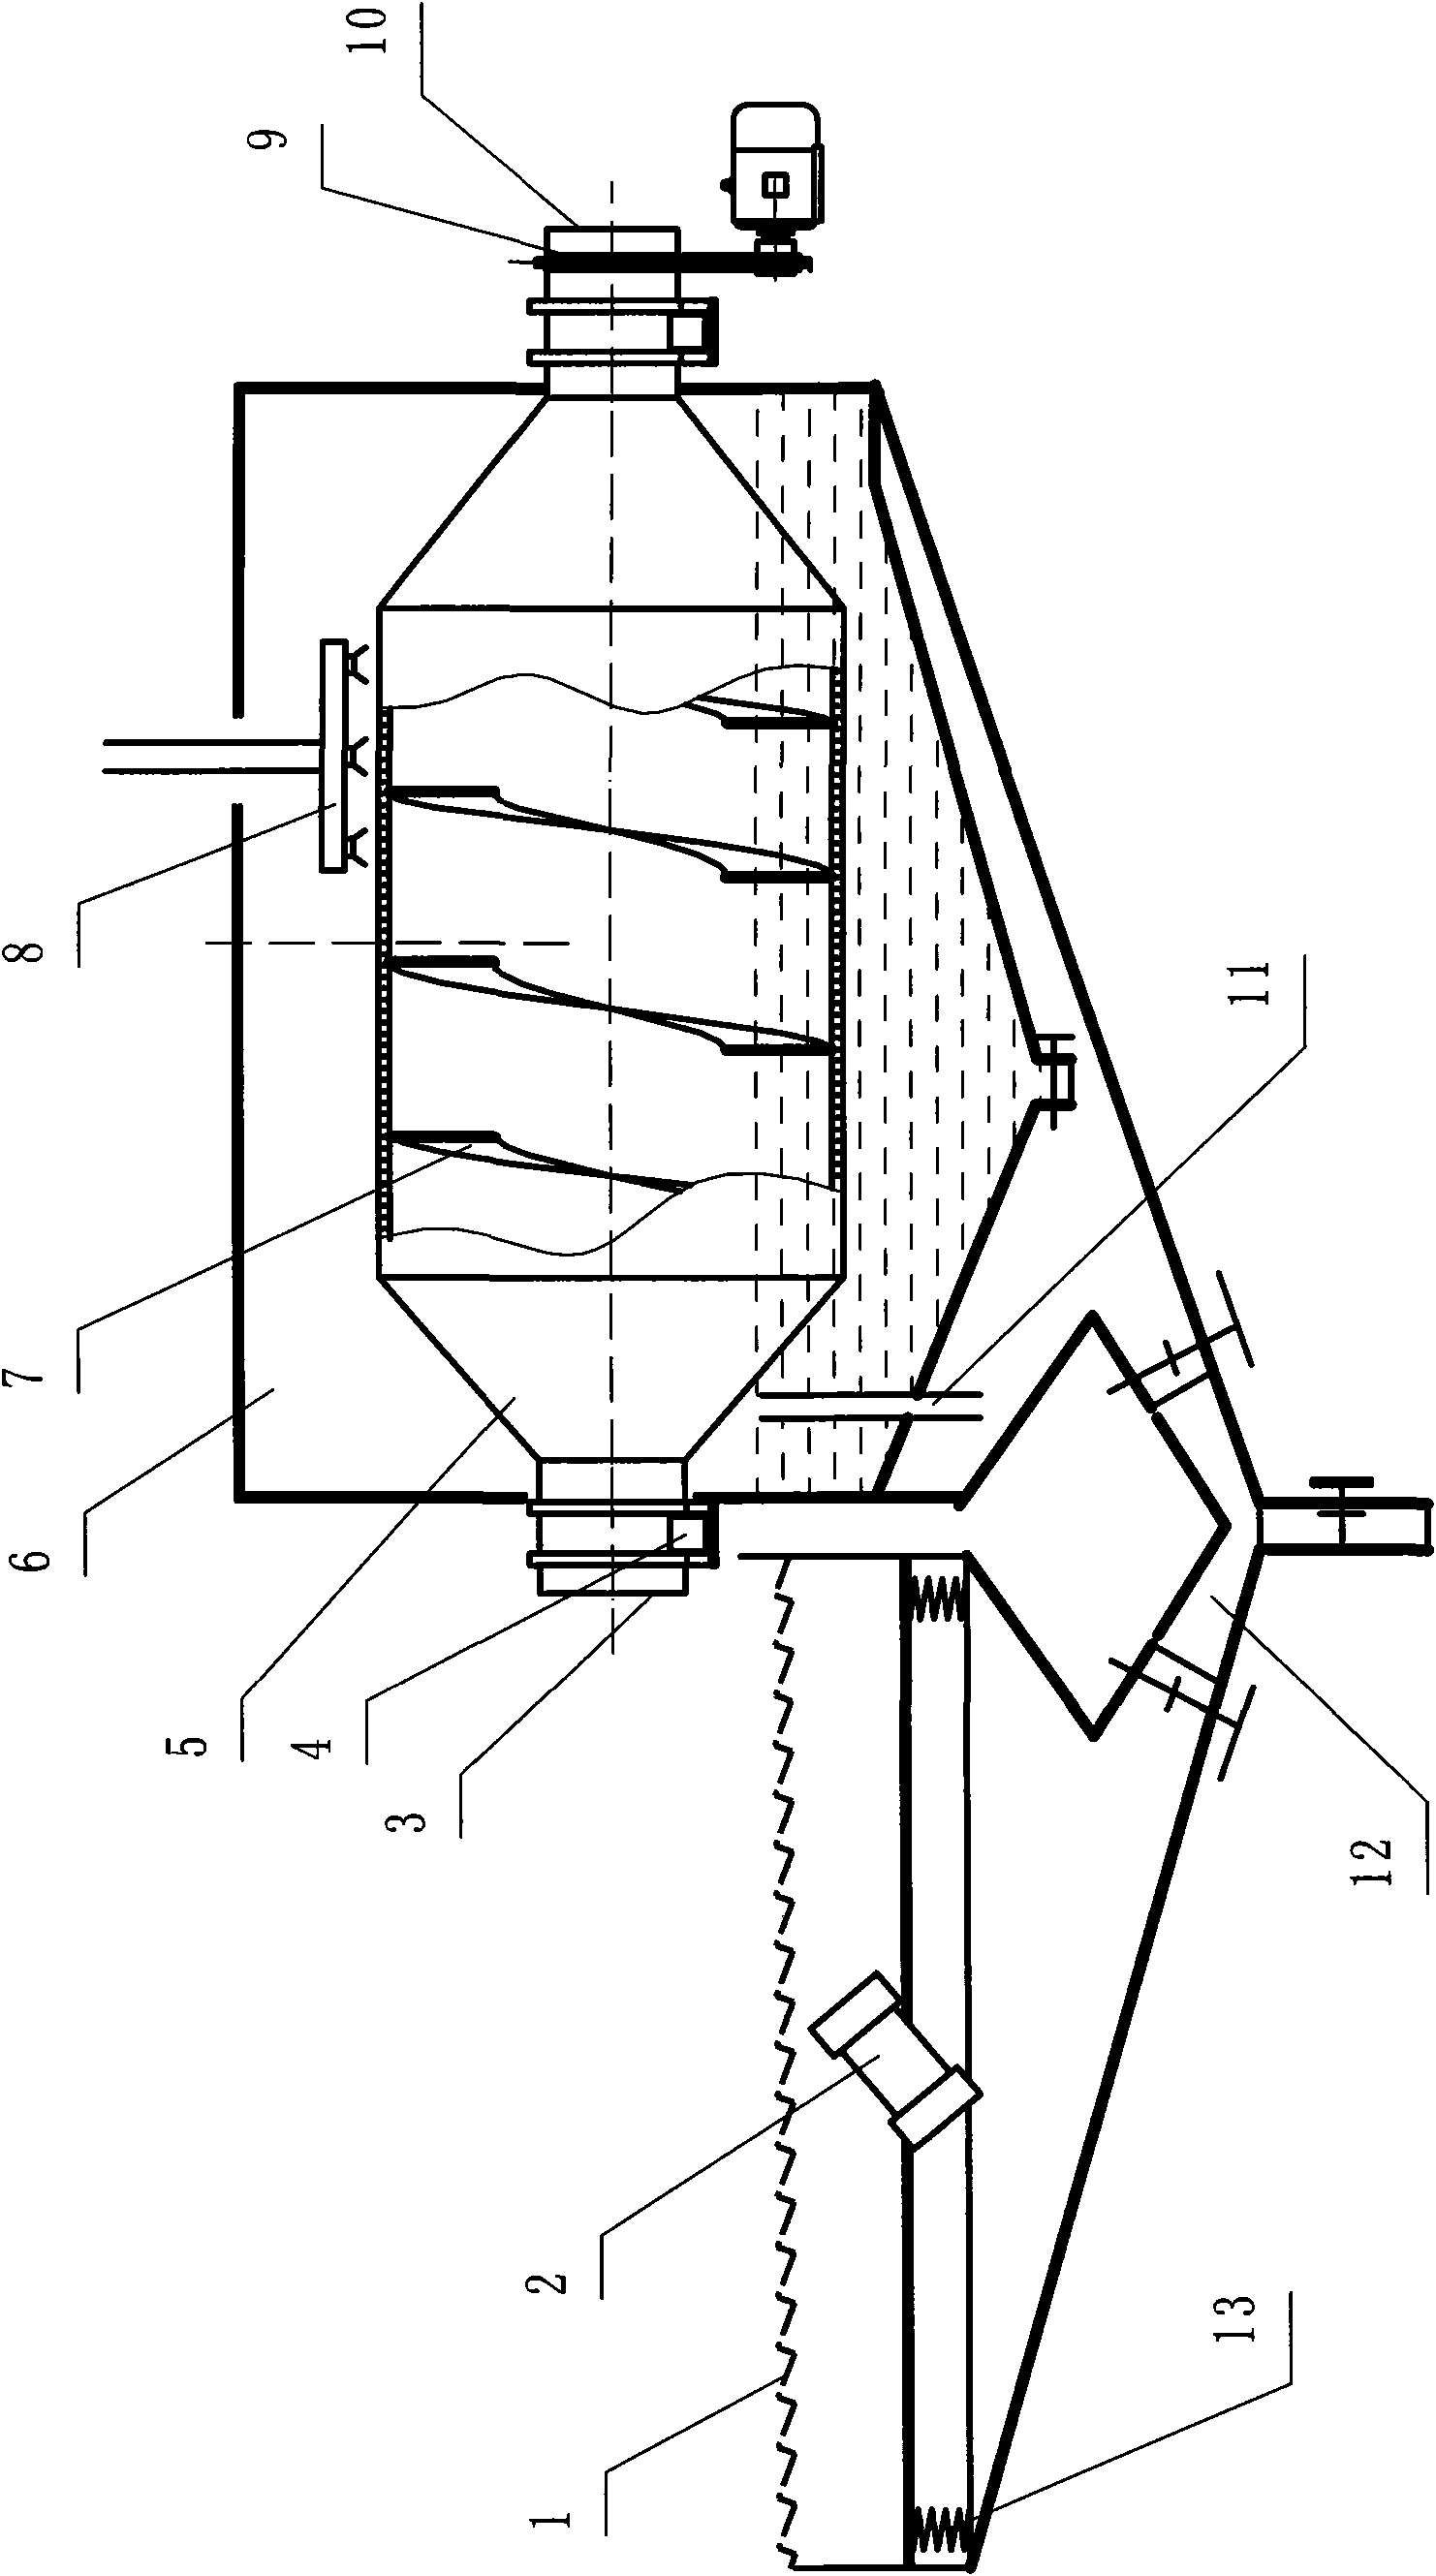 Device for precessing acid solution used in corron seed manufacture